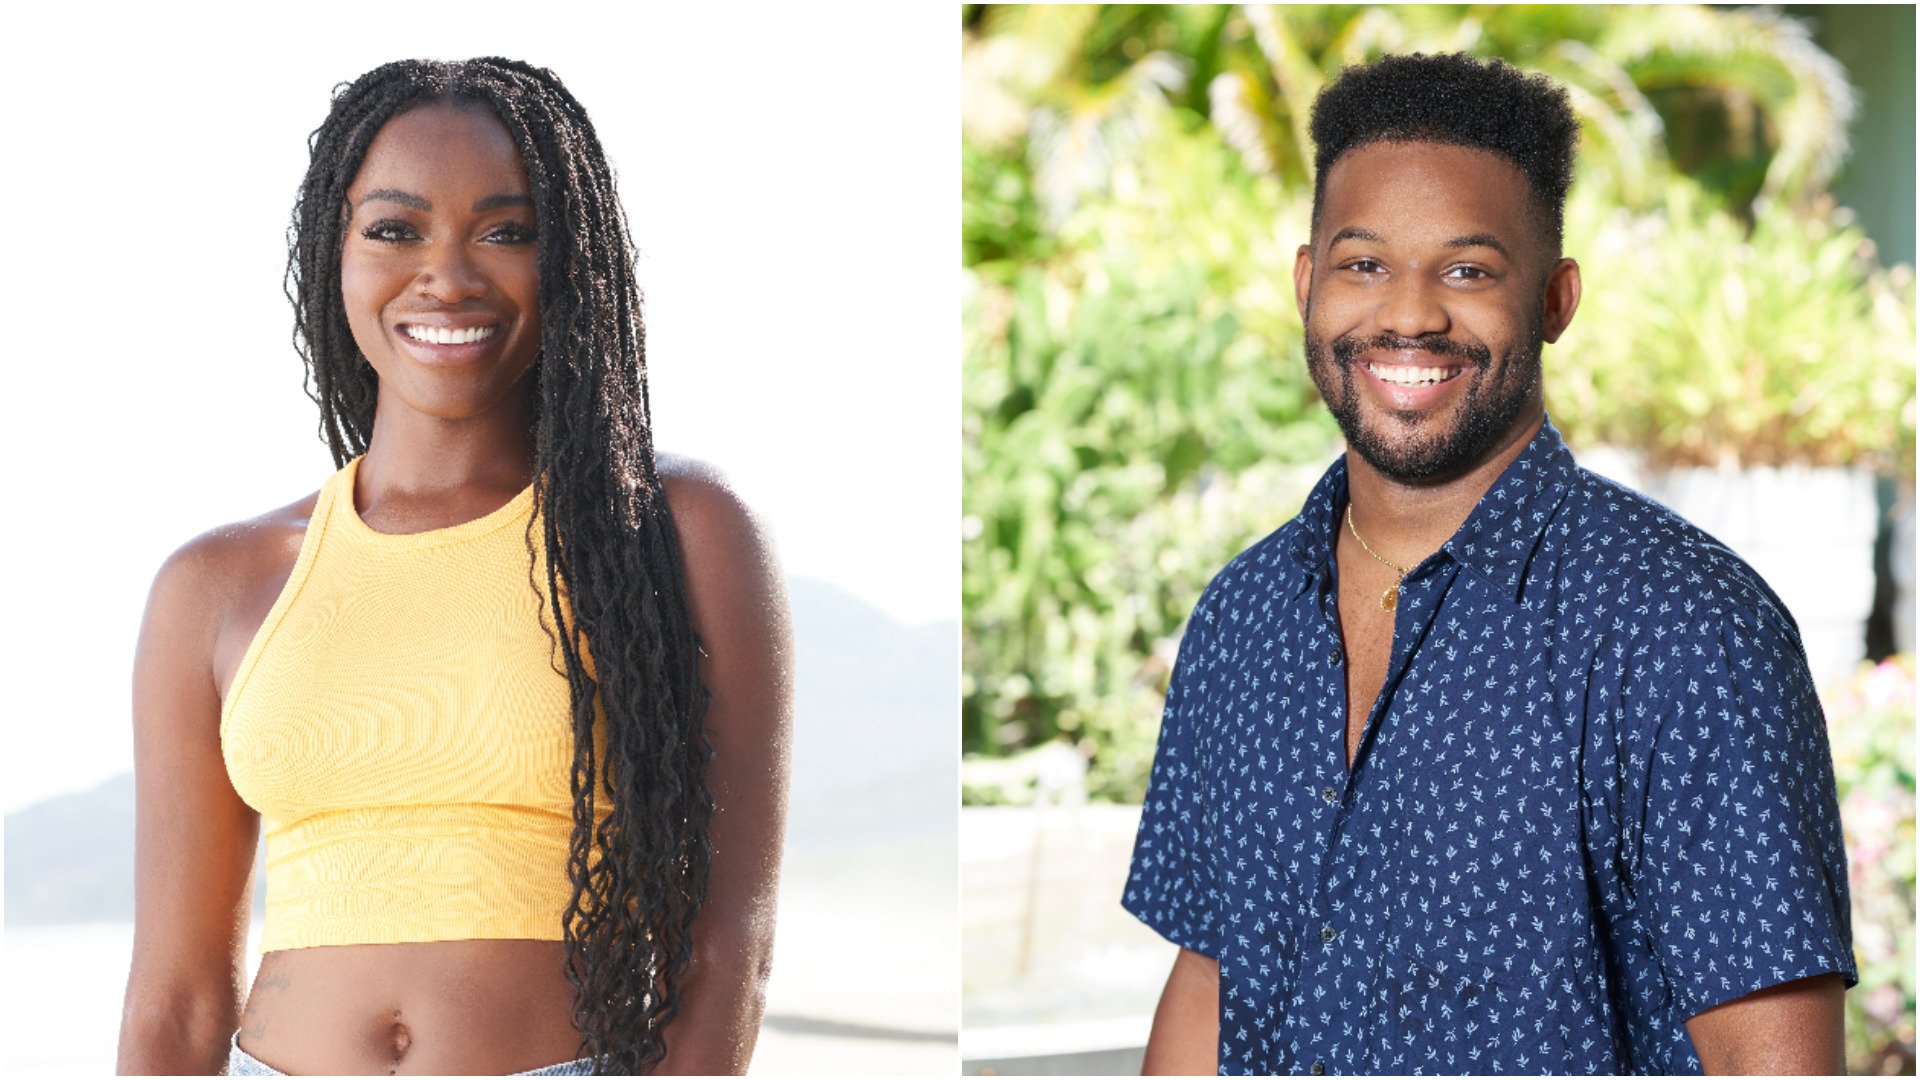 Headshots of Tahzjuan Hawkins and Tre Cooper from ‘Bachelor in Paradise’ Season 7 in 2021